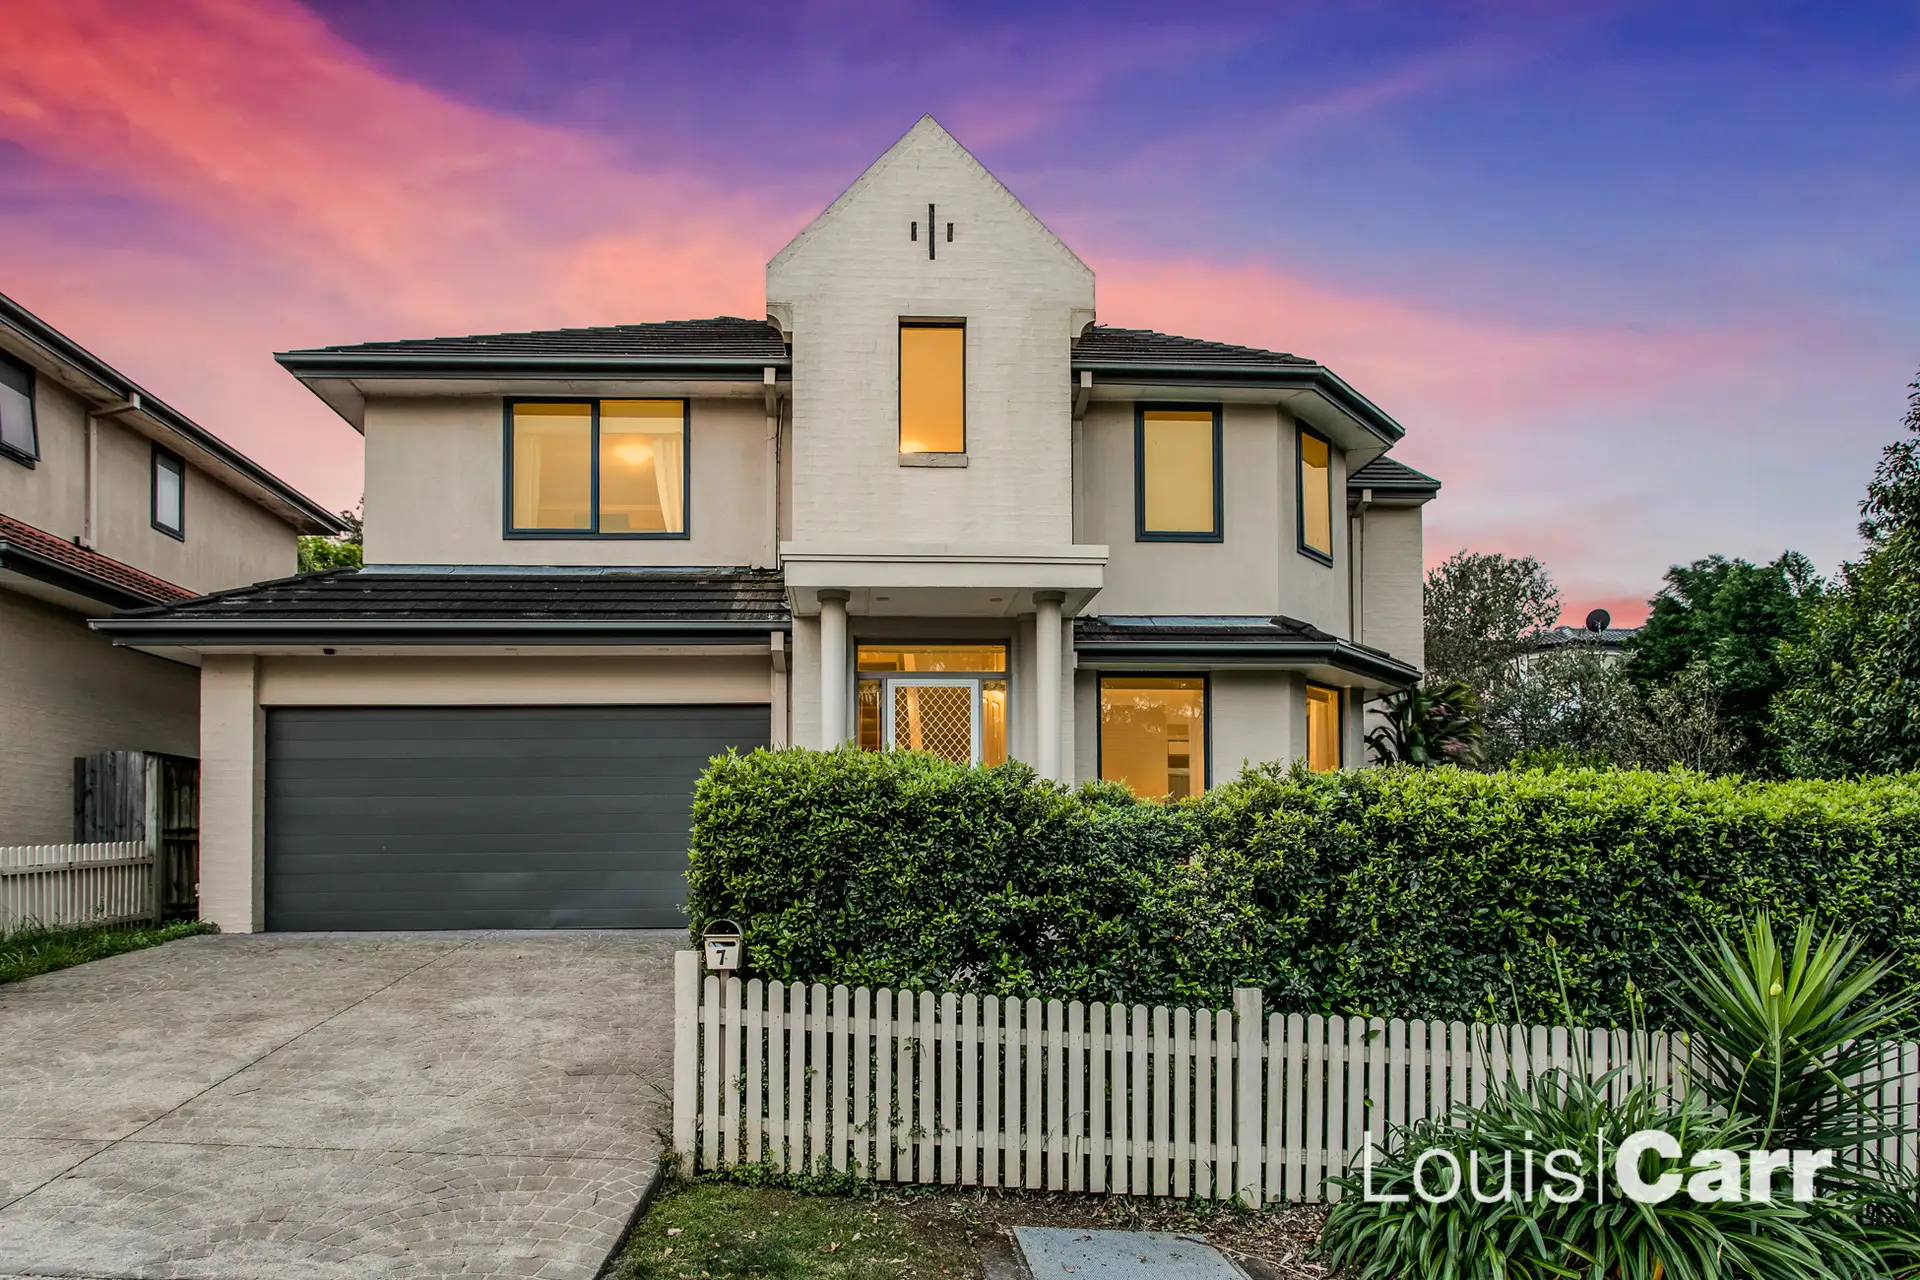 Photo #1: 7 Peartree Circuit, West Pennant Hills - Sold by Louis Carr Real Estate